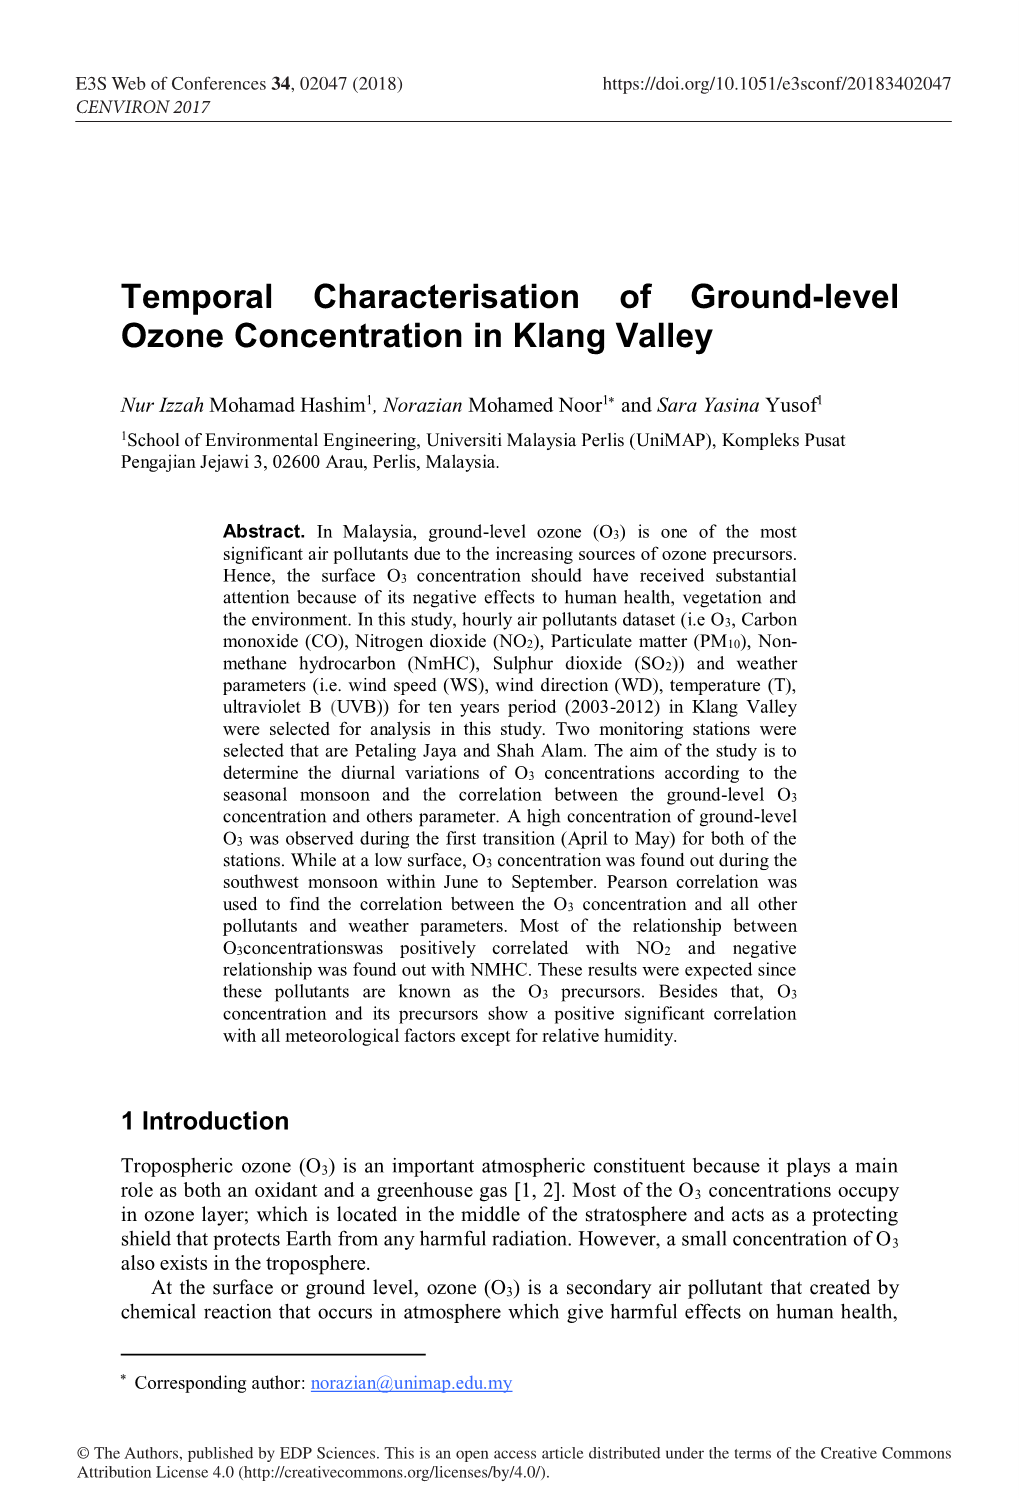 Temporal Characterisation of Ground-Level Ozone Concentration in Klang Valley